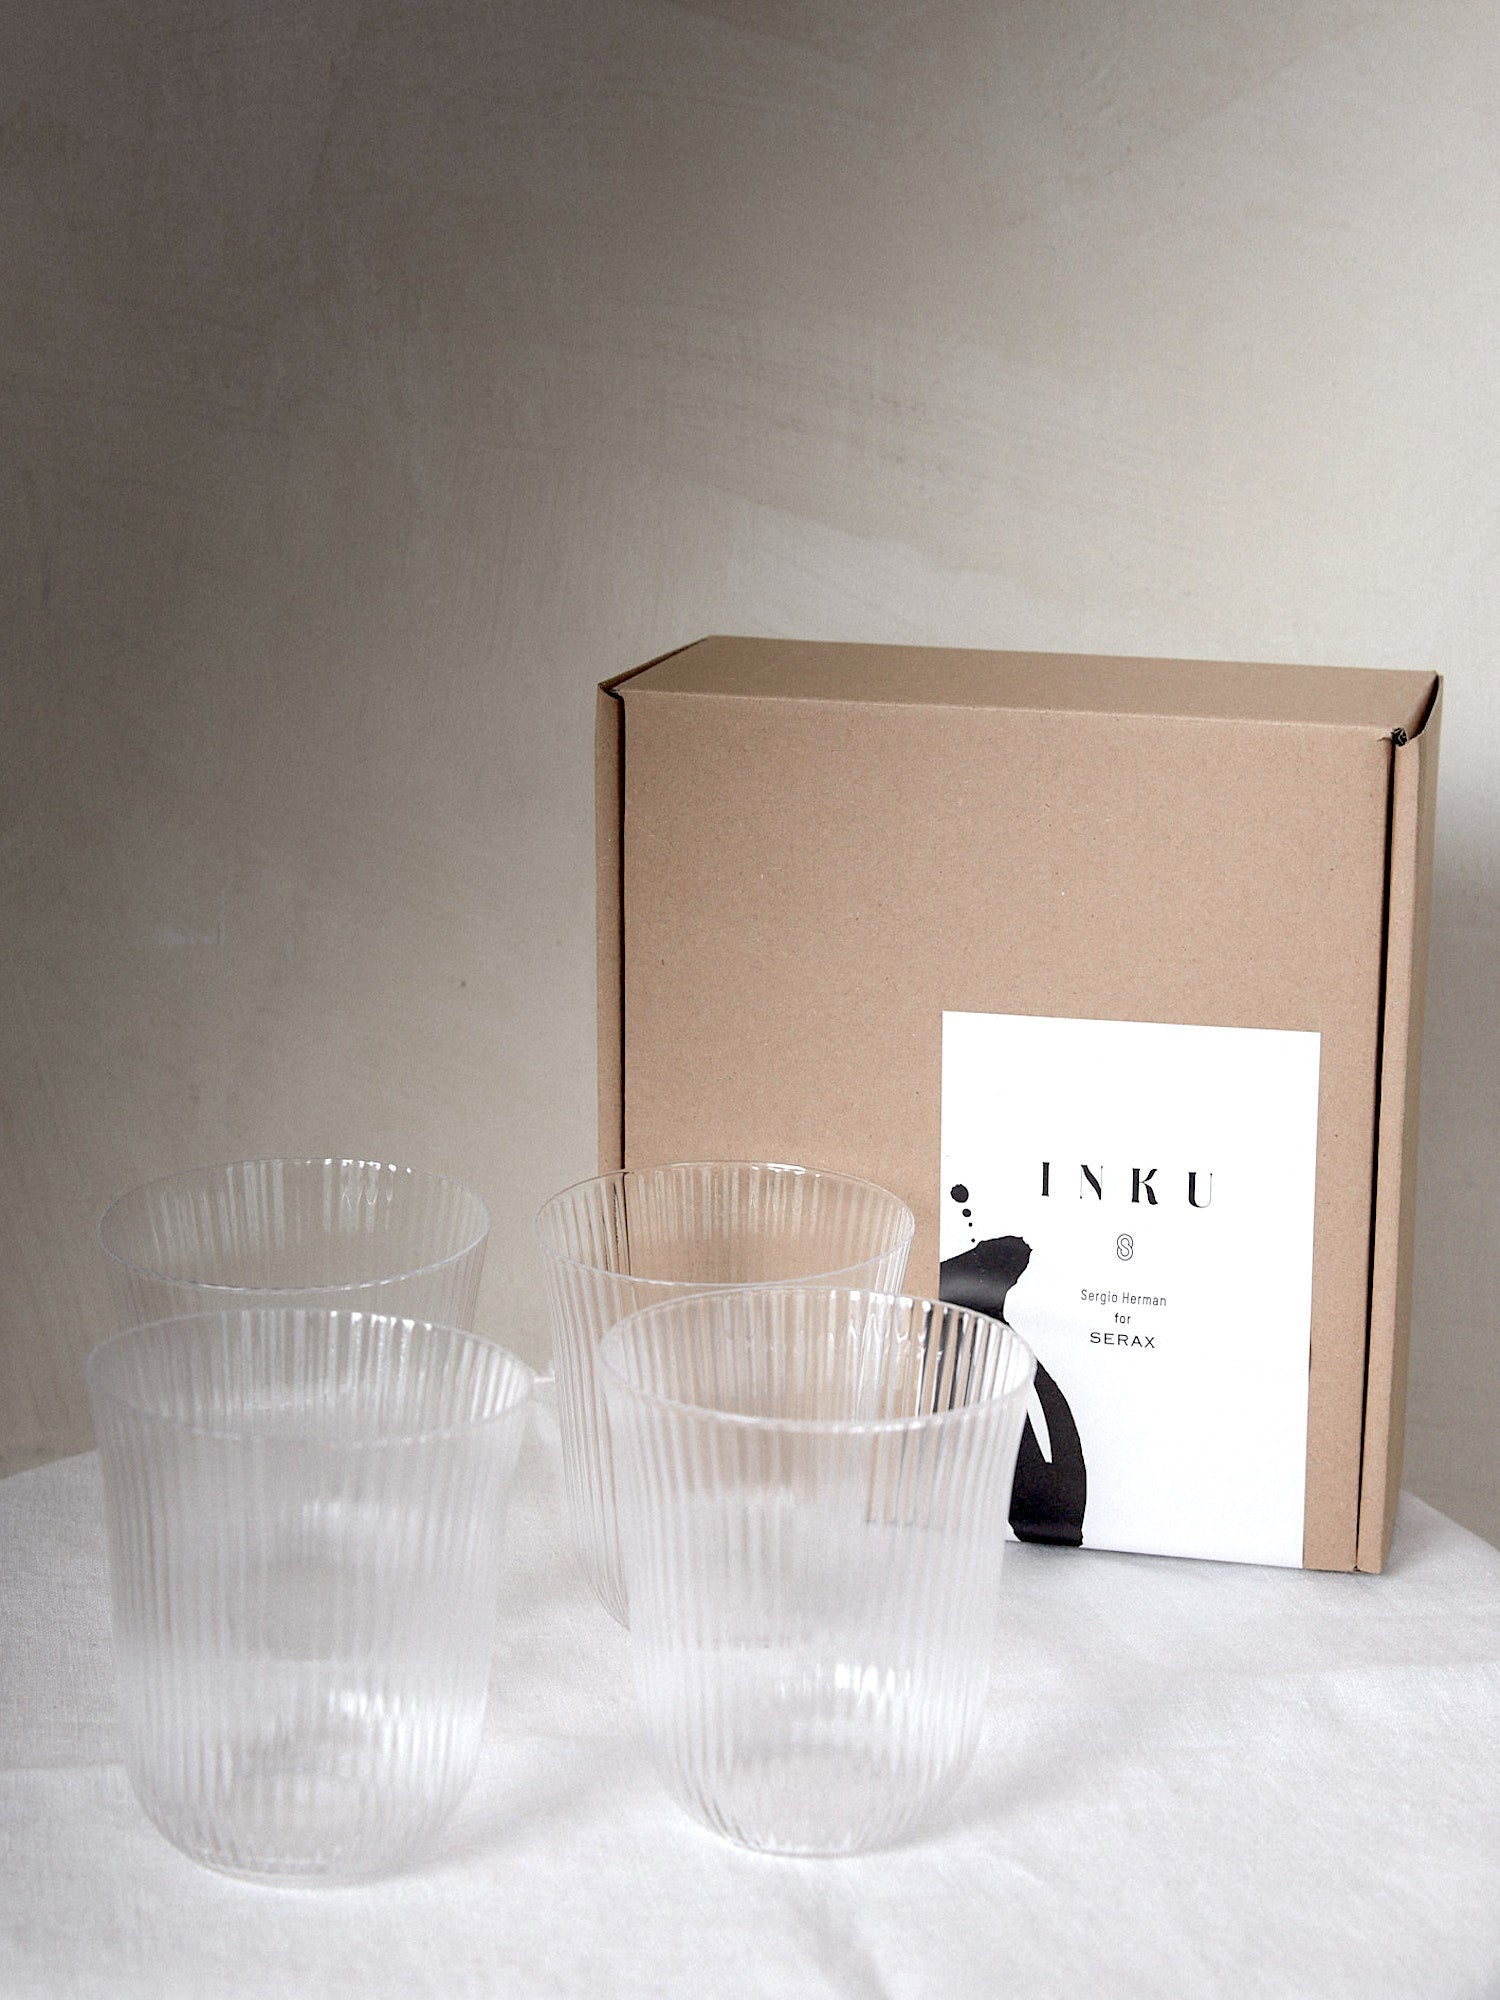 Large Tumbler Set/4. Unique find. Special edition set of ribbed drinking glasses designed by famed Michelin star chef and restauranteur, Sergio Herman, featuring delicate, tender folds fading to the edge of the glass. 